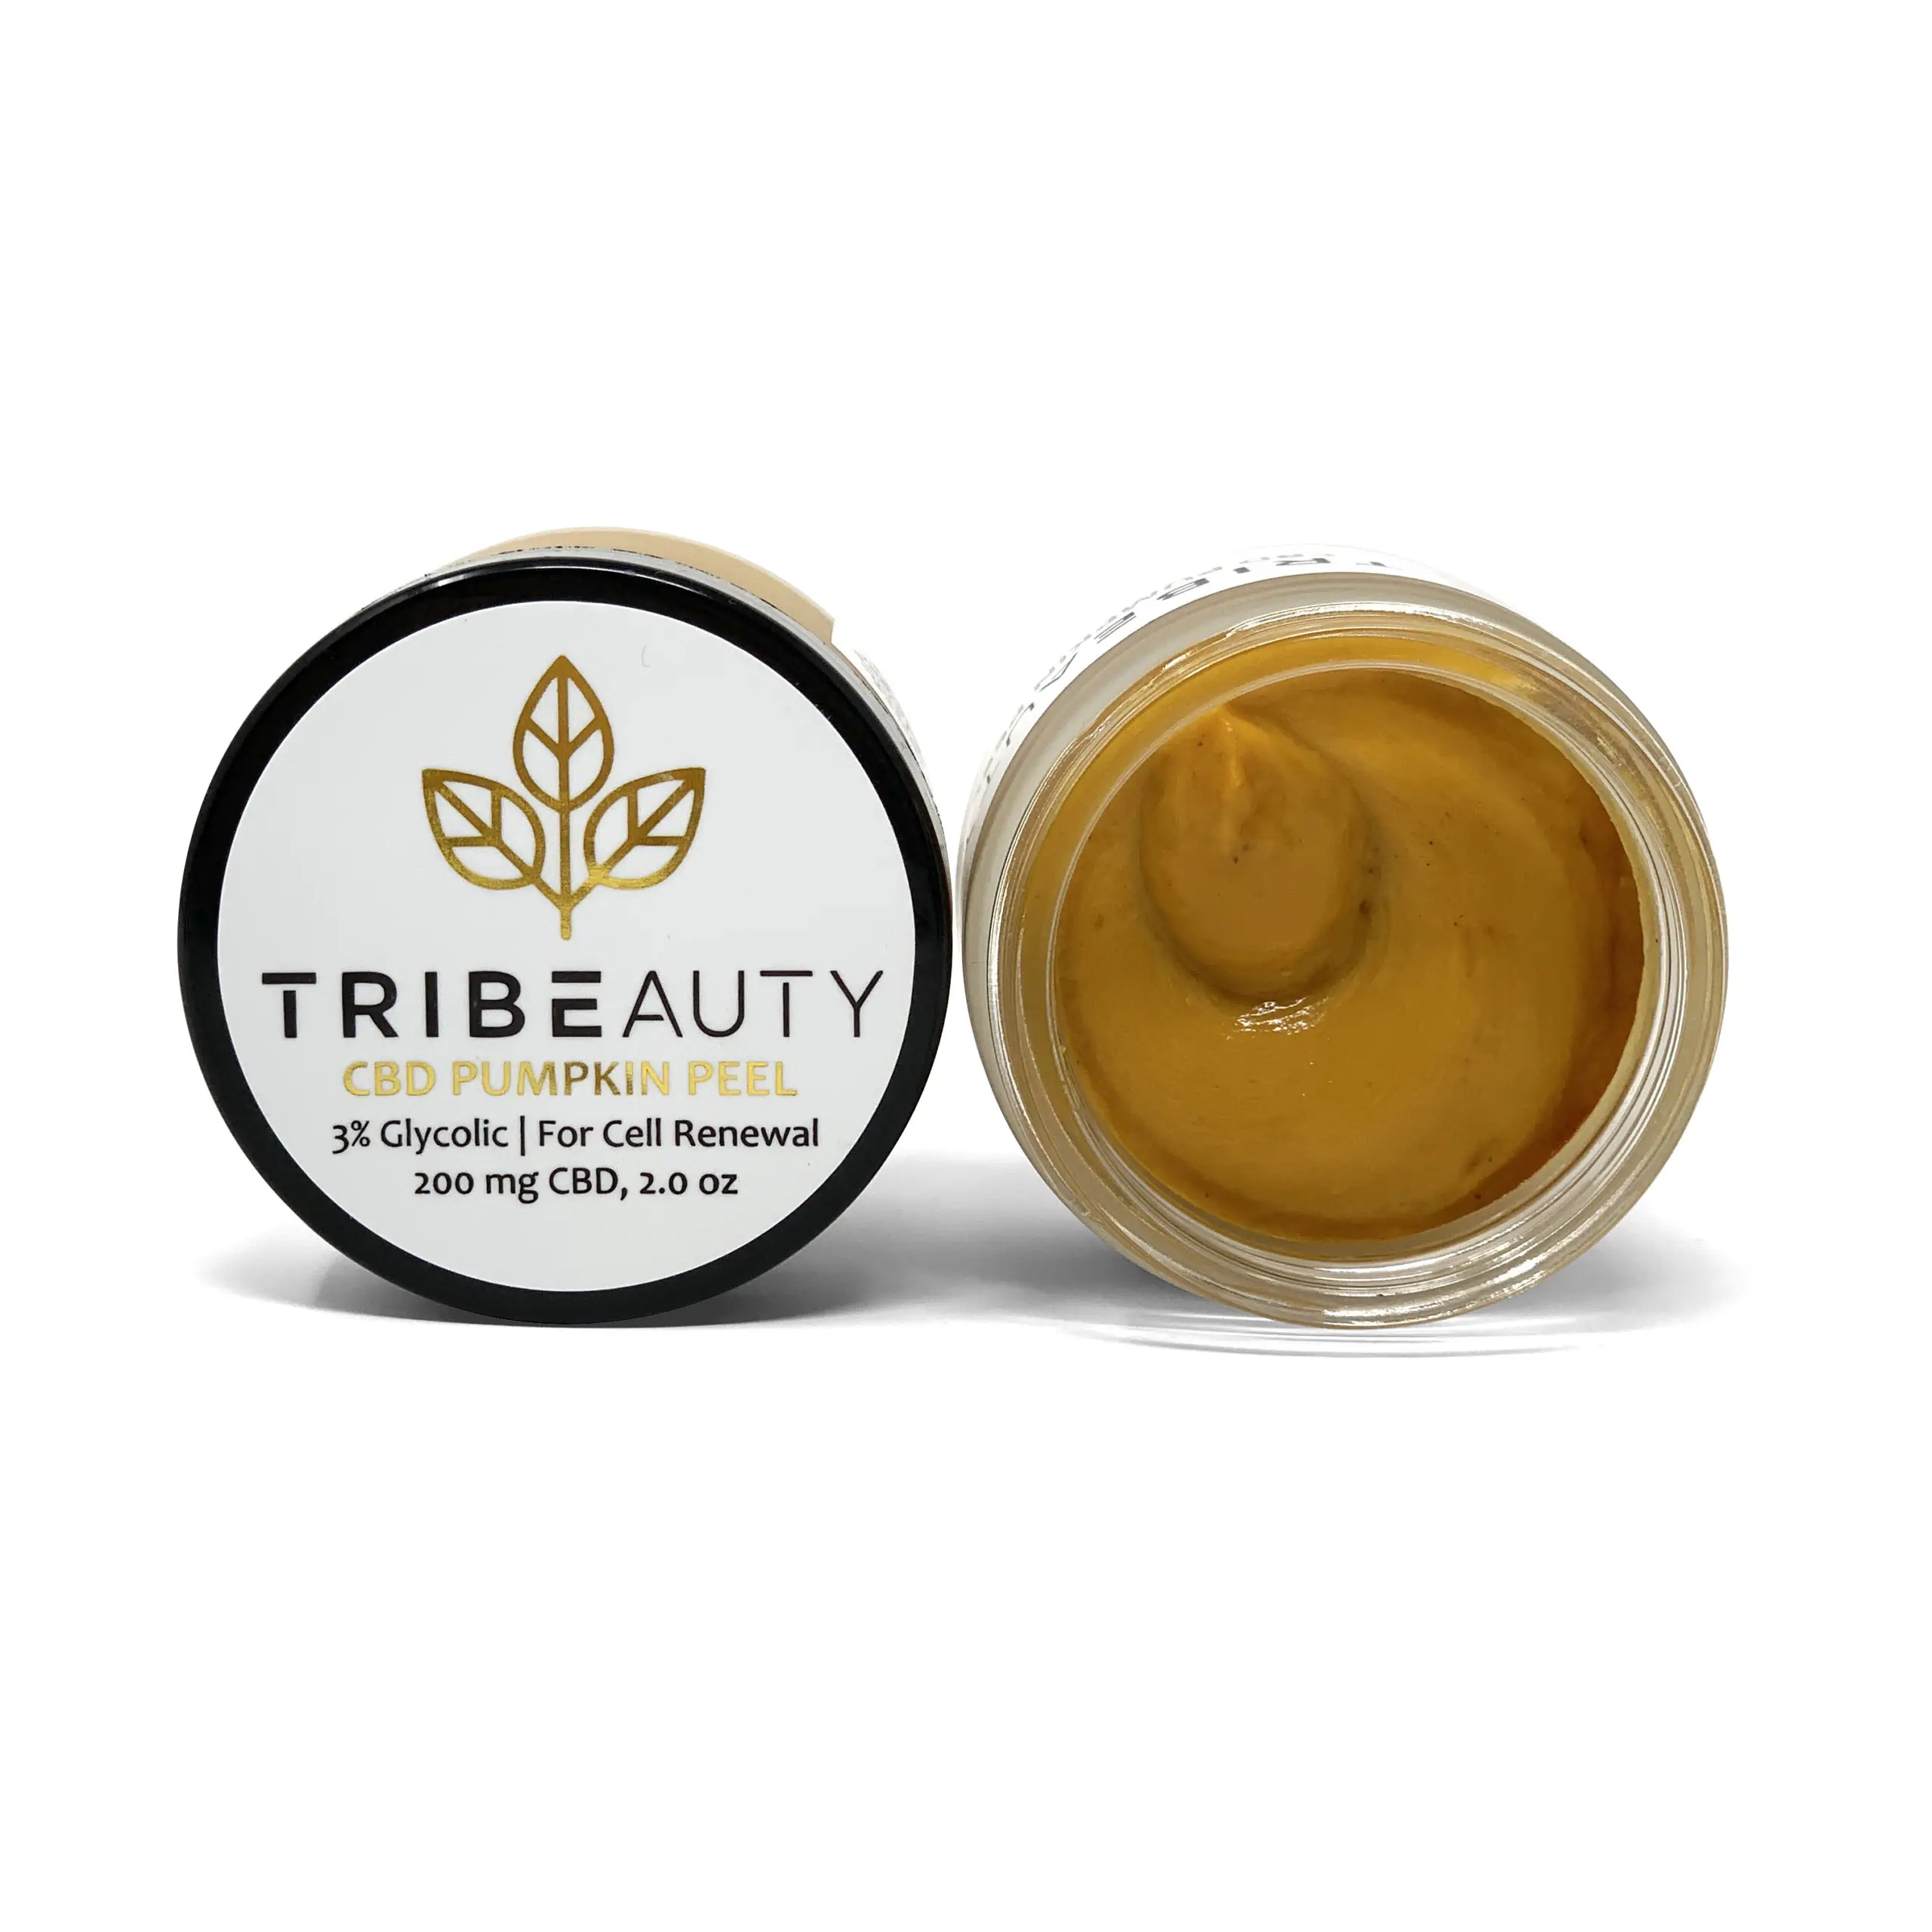 CBD-Infused Beauty Products To Celebrate 4/20